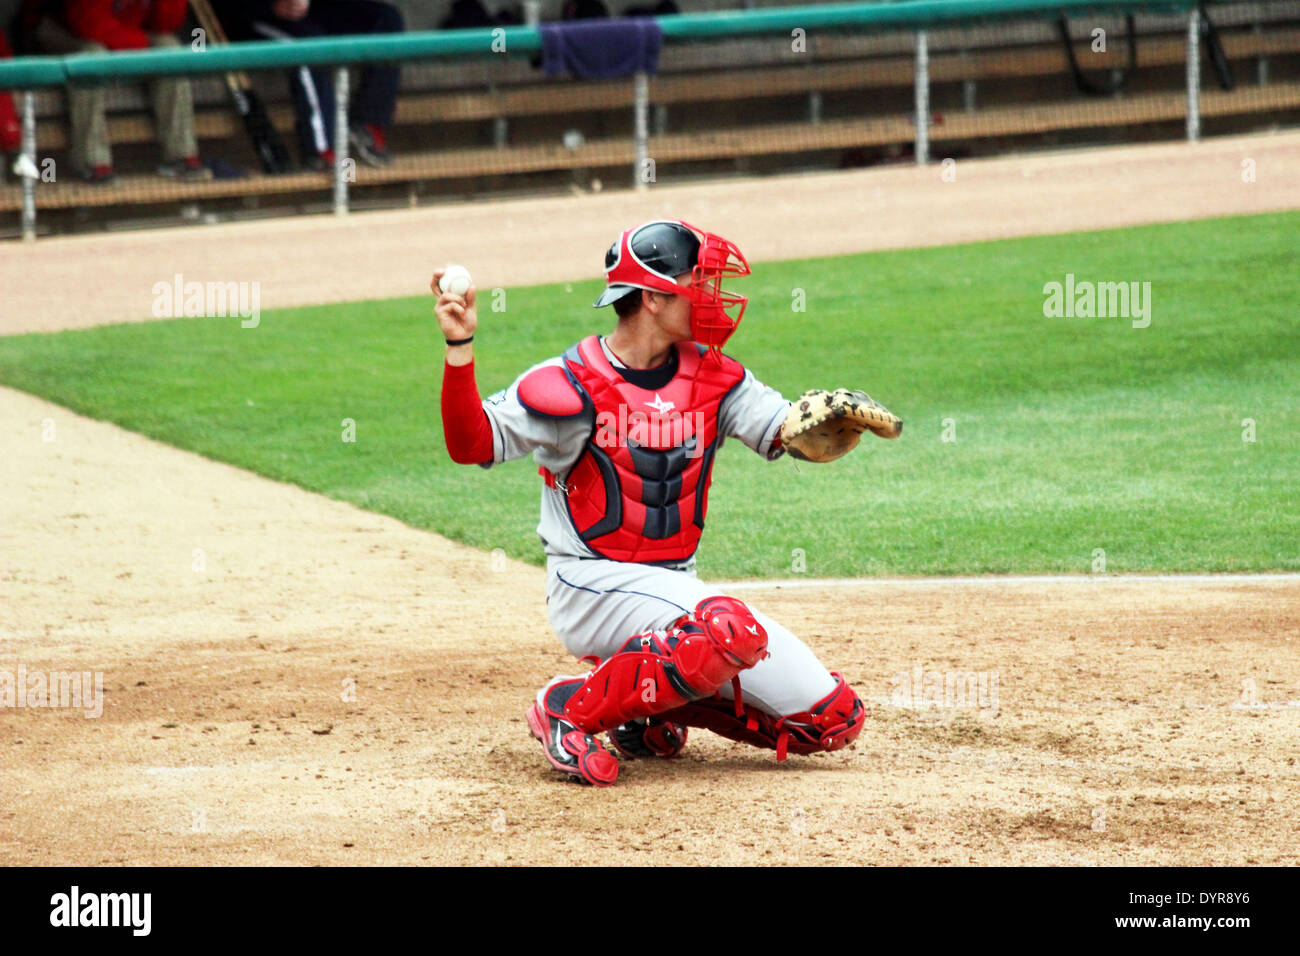 A baseball catcher throwing a baseball back to the pitcher. Stock Photo